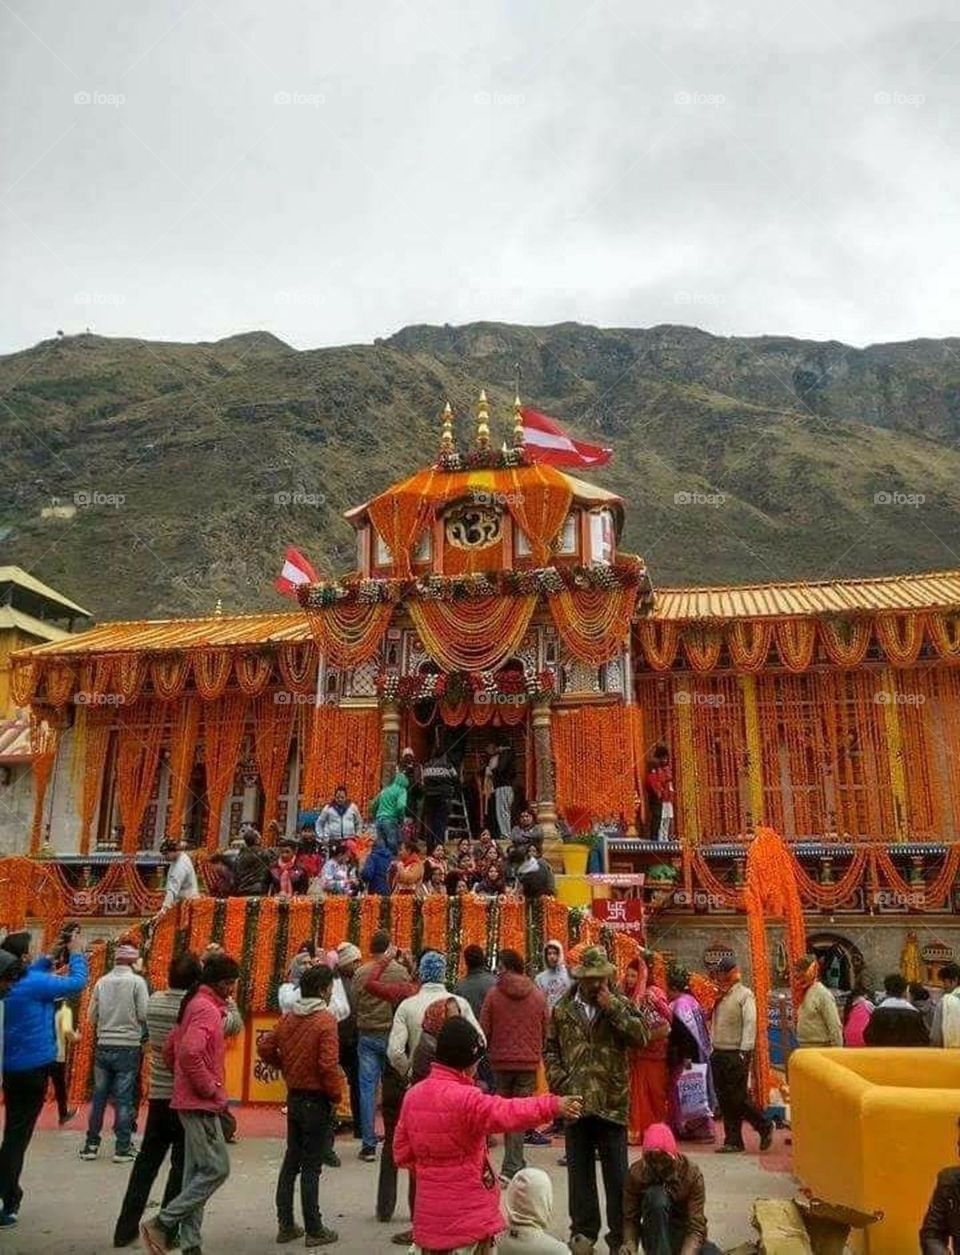 Badrinath or Badrinarayan Temple is a Hindu temple dedicated to Vishnu which is situated in the town of Badrinath in Uttarakhand, India. The temple and town form one of the four Char Dham and Chota Char Dham pilgrimage sites.